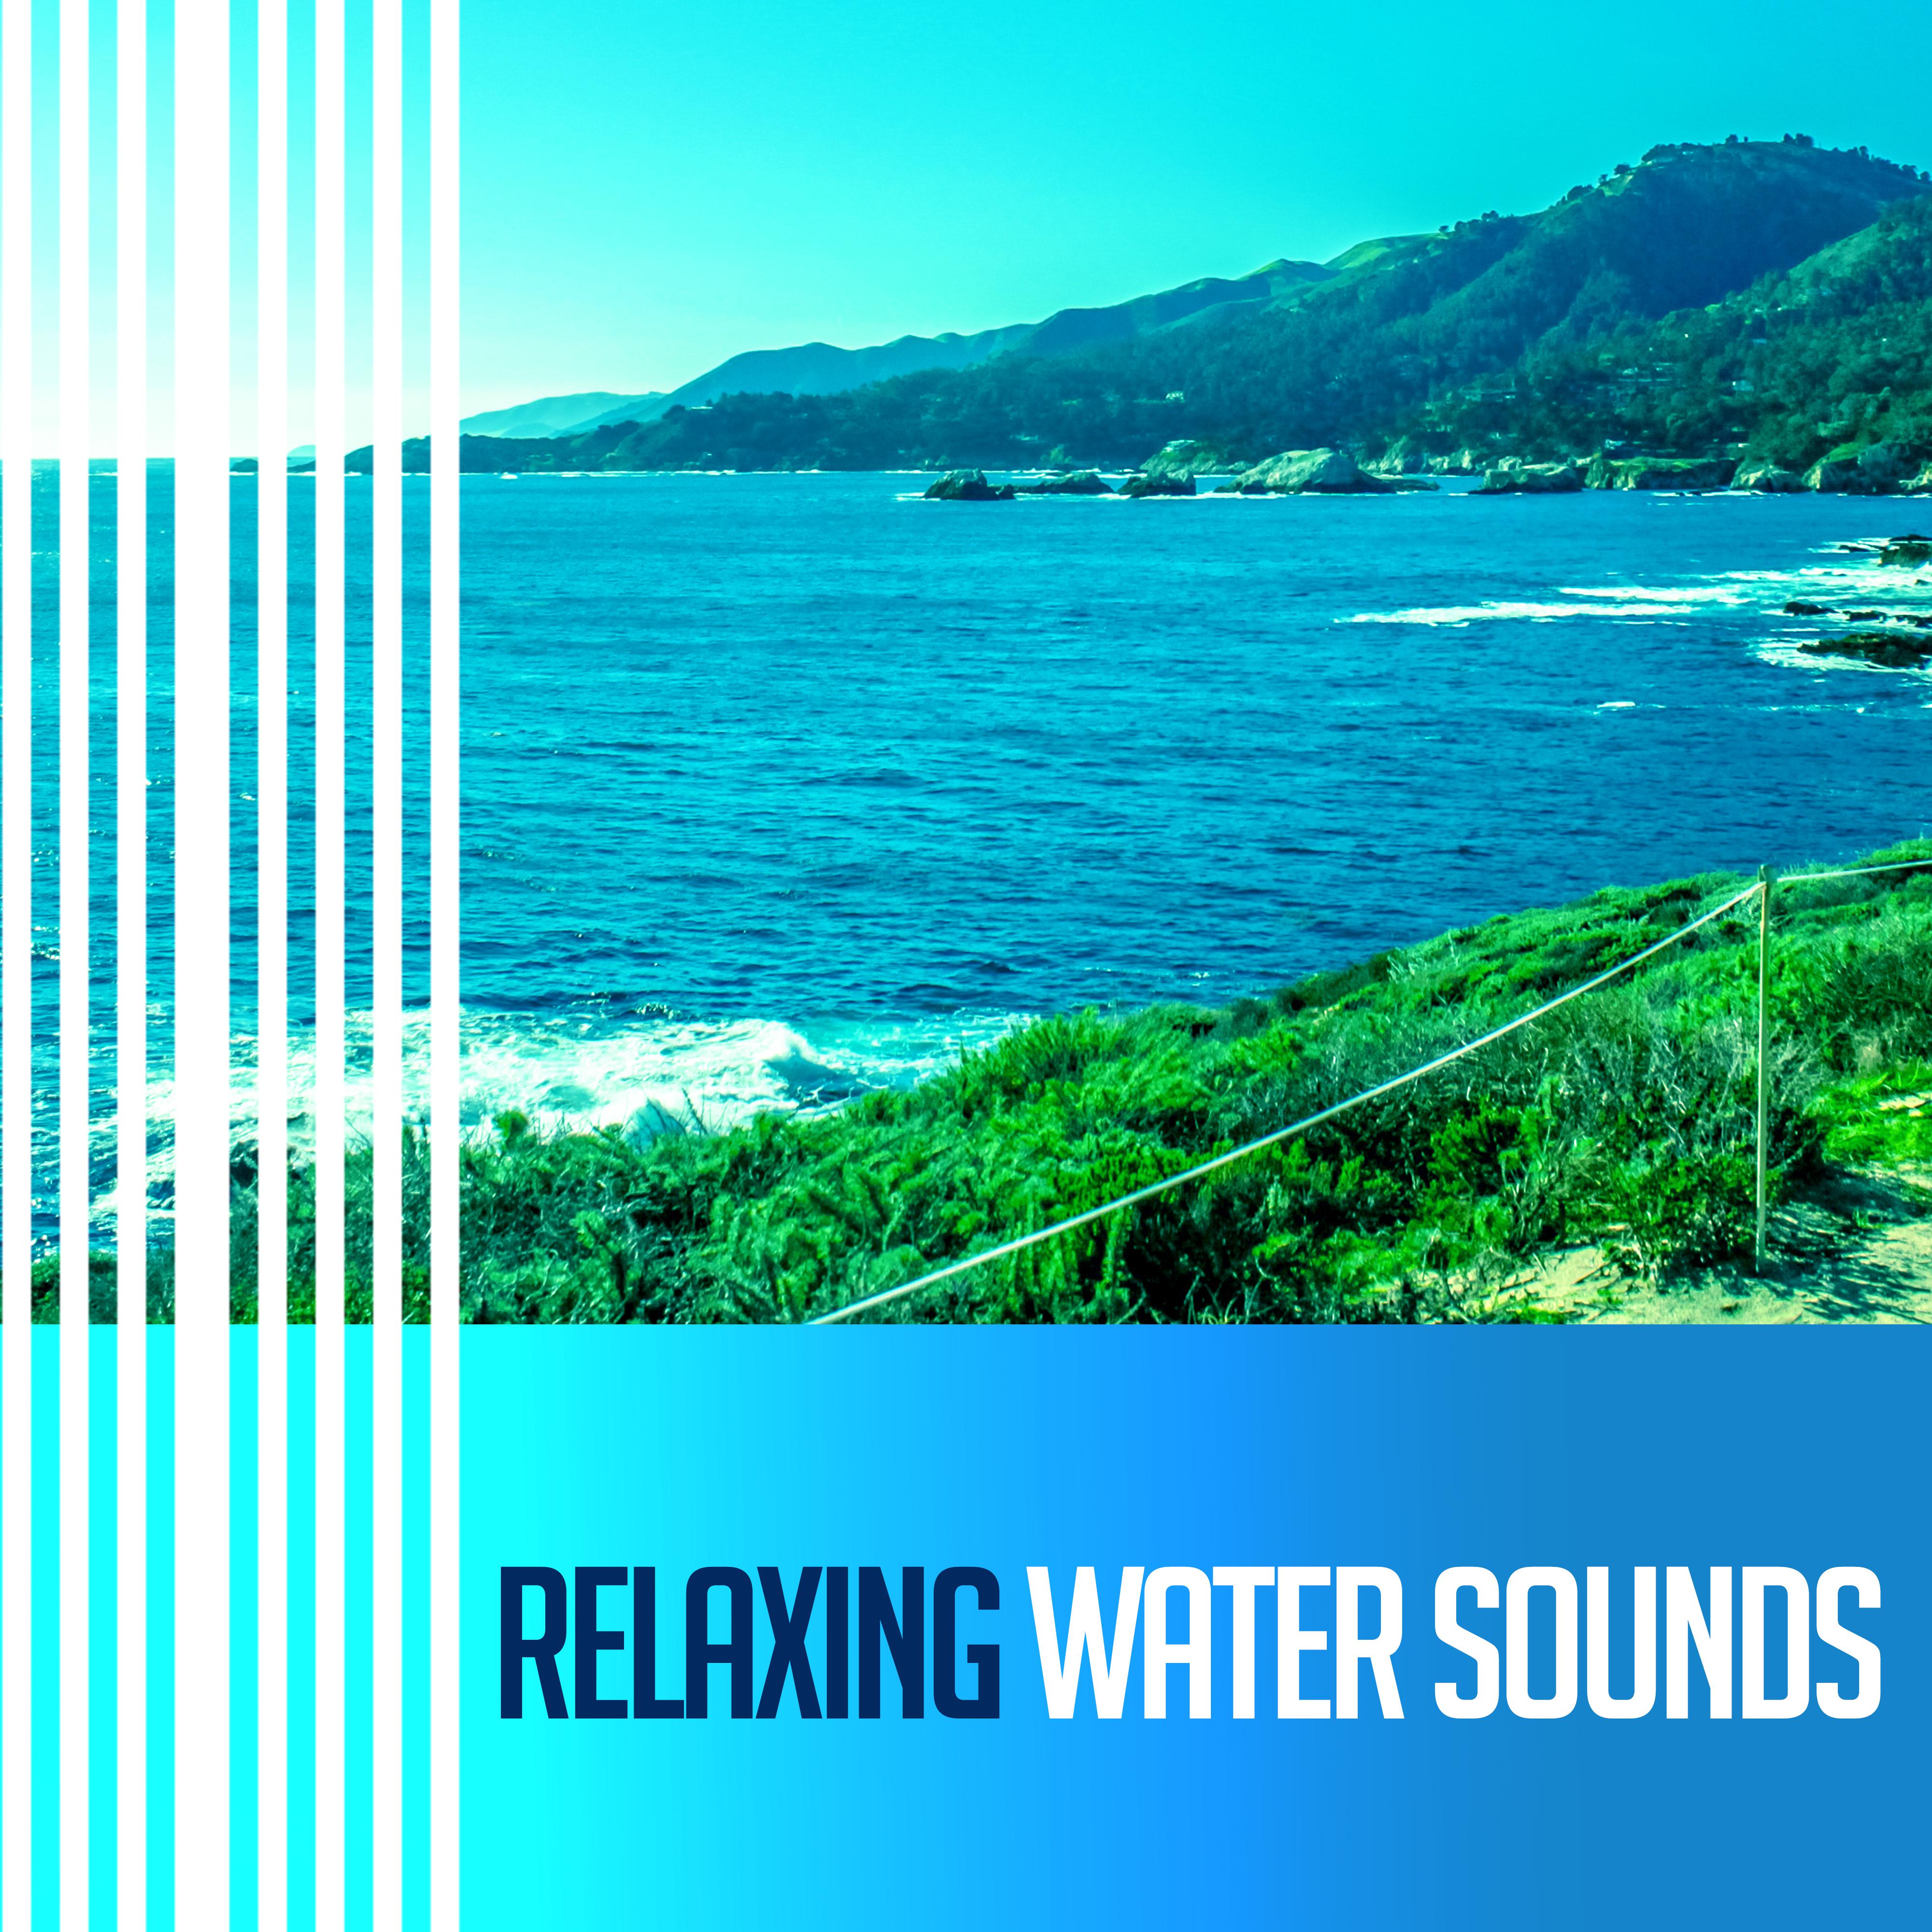 Relaxing Water Sounds  Soothing Waves, Ocean Sounds, Music to Rest  Relax, Inner Silence, Harmony